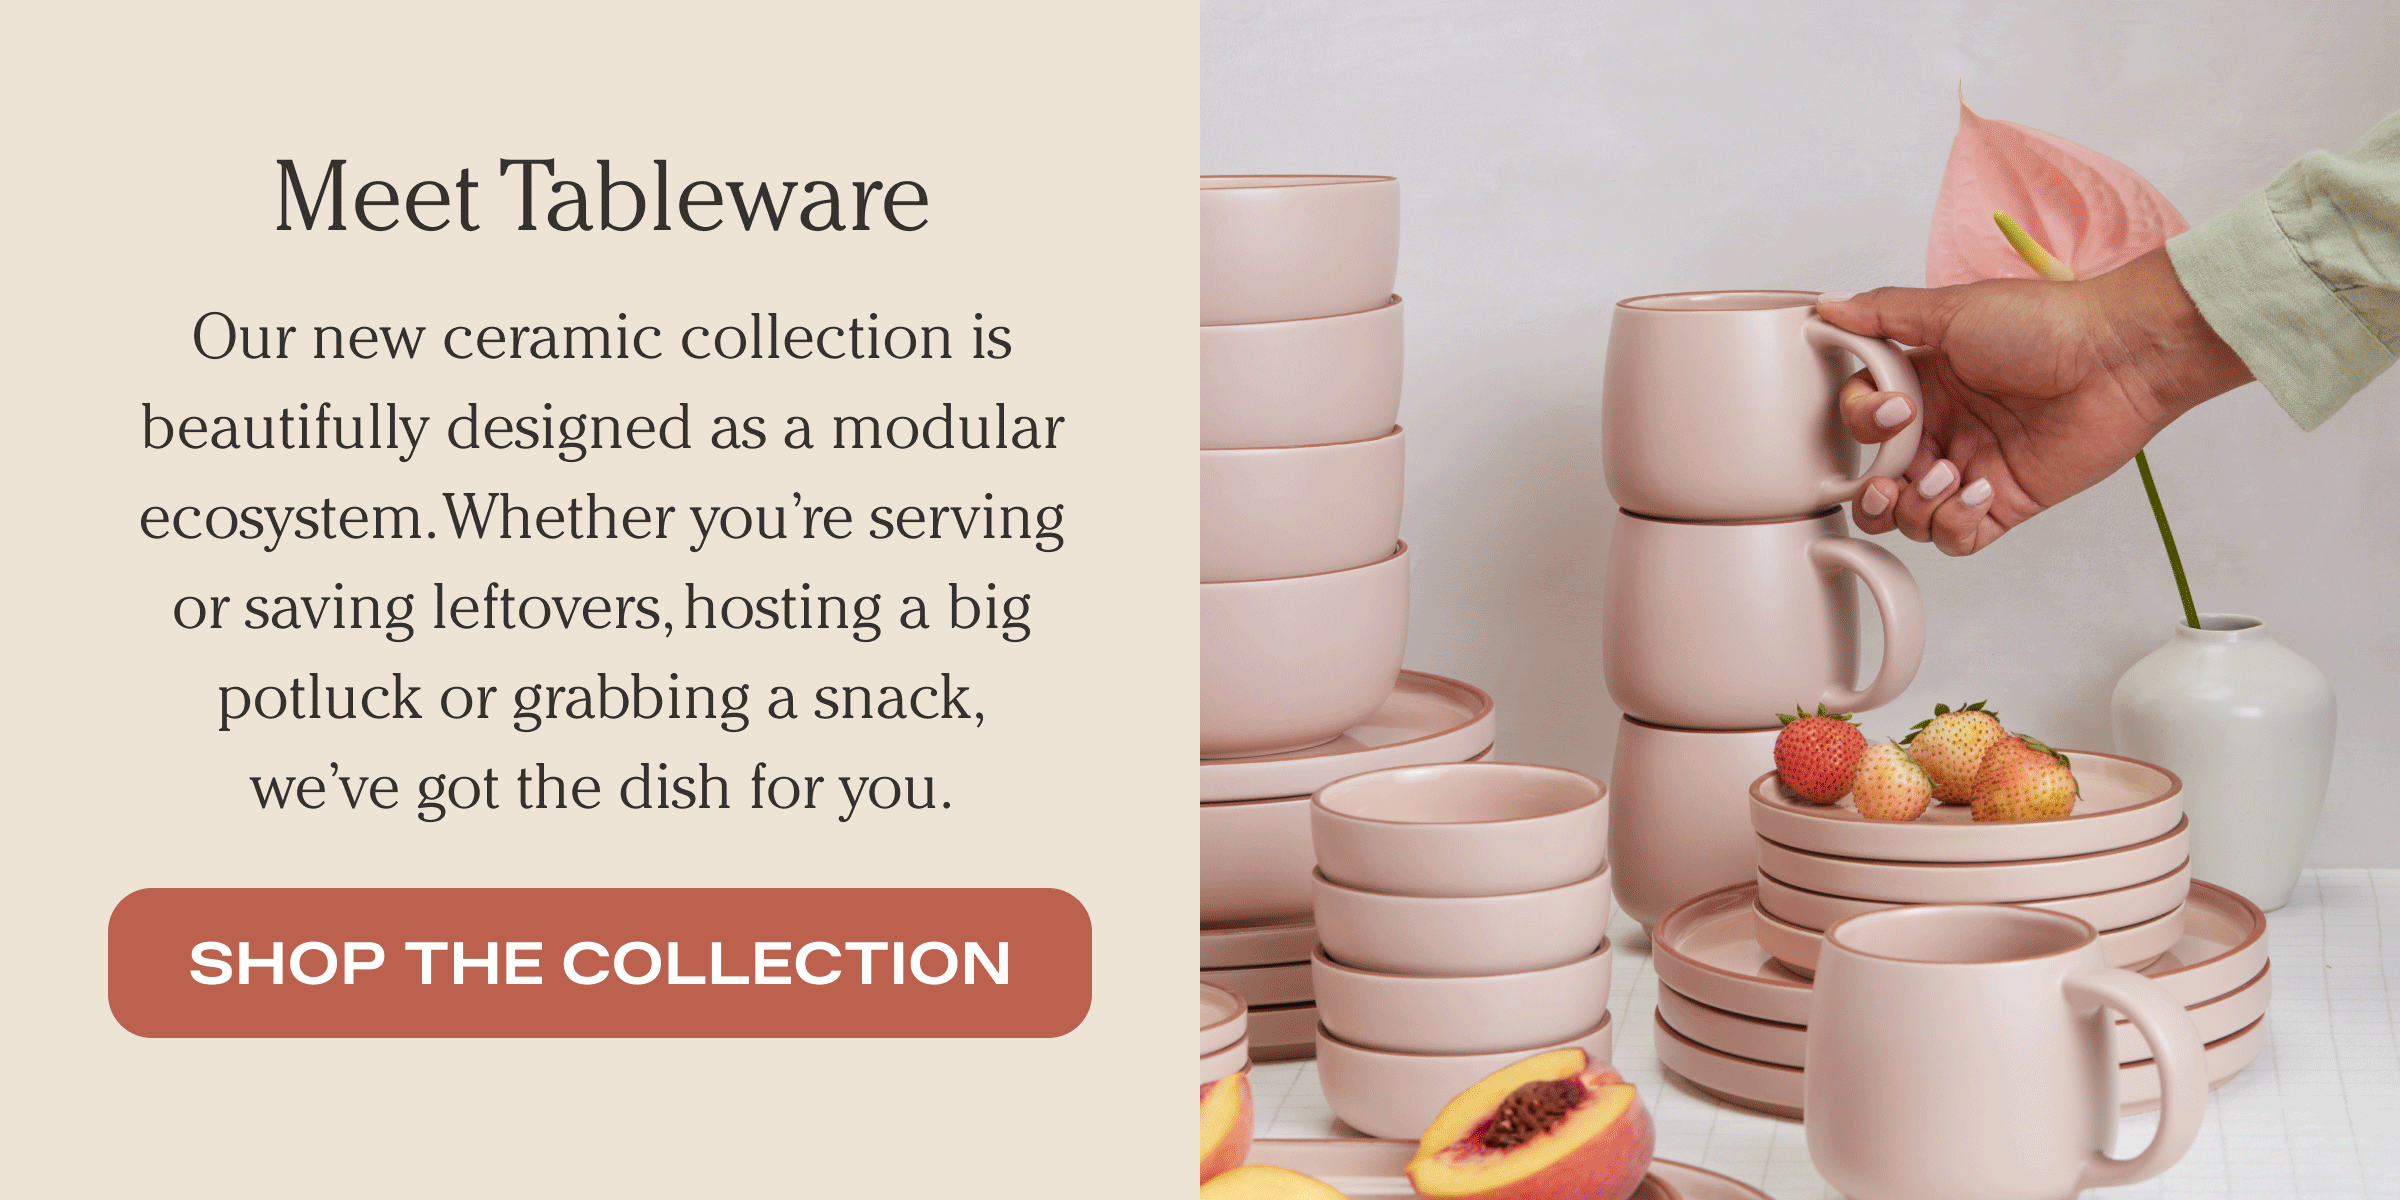 Meet Tableware - Our new ceramic collection is beautifully designed as a modular ecosystem. Whether you're serving or saving leftovers, hosting a big potluck or grabbing a snack, we've got the dish for you. - Shop the collection